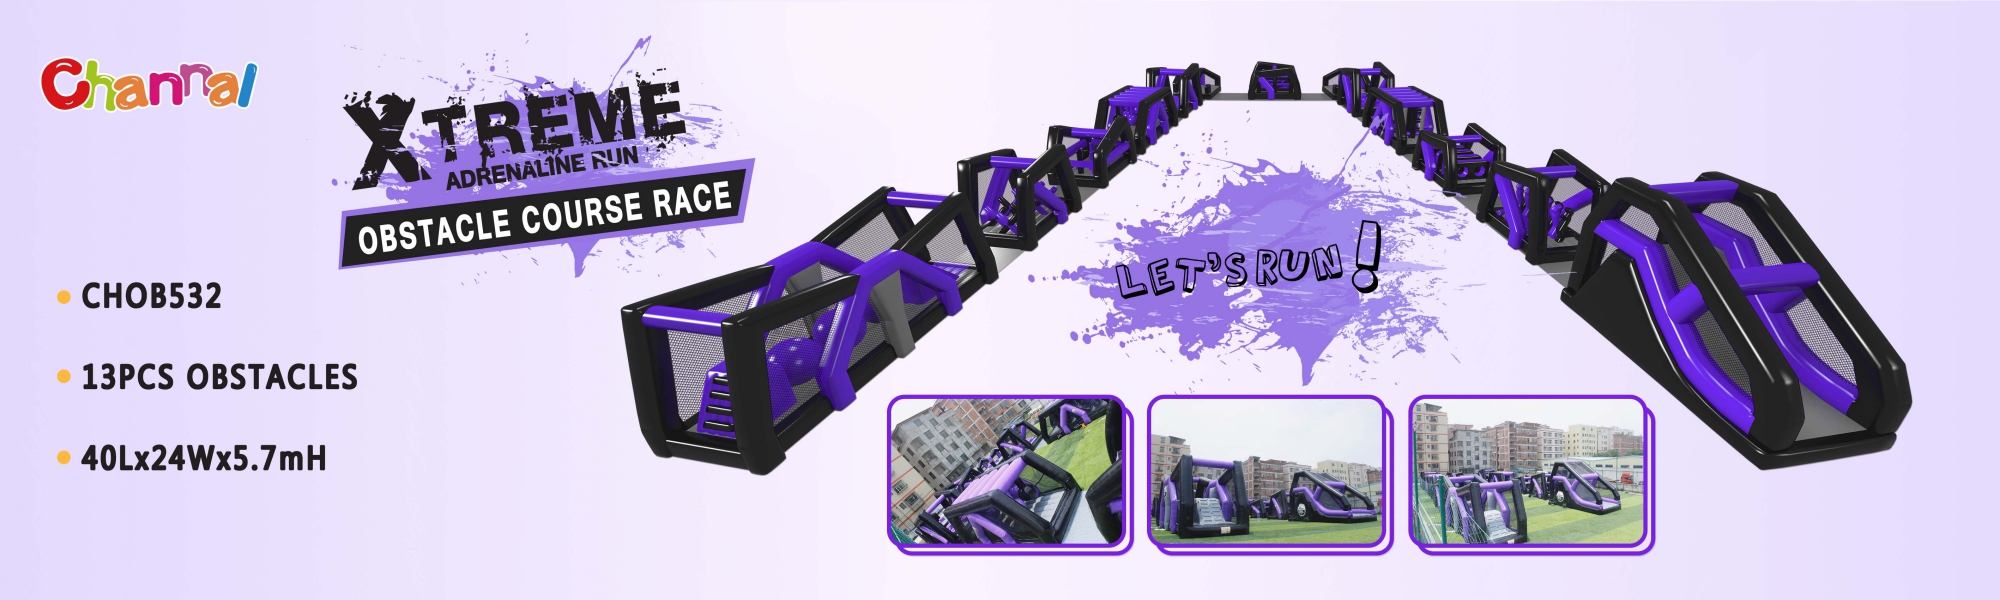 banner - obstacle course